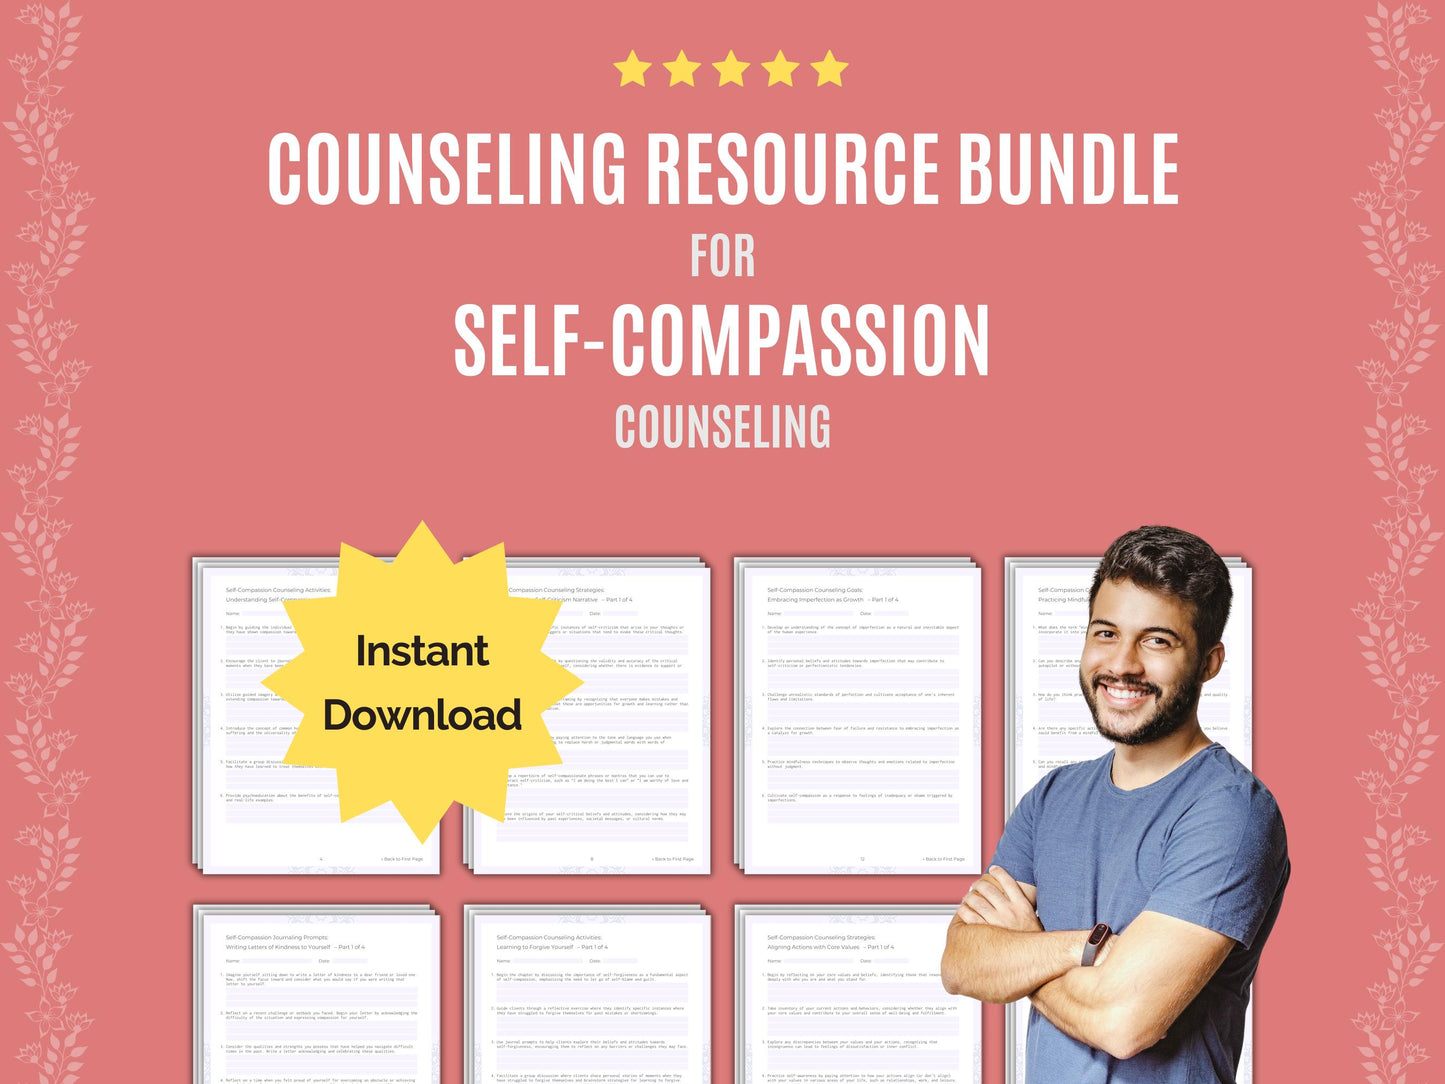 Therapy, Self-Compassion Idea, Counseling, Worksheet, Content, Counselor, Self-Compassion, Template, Therapist, Self-Compassion Tool, Workbook, Resource, Mental Health